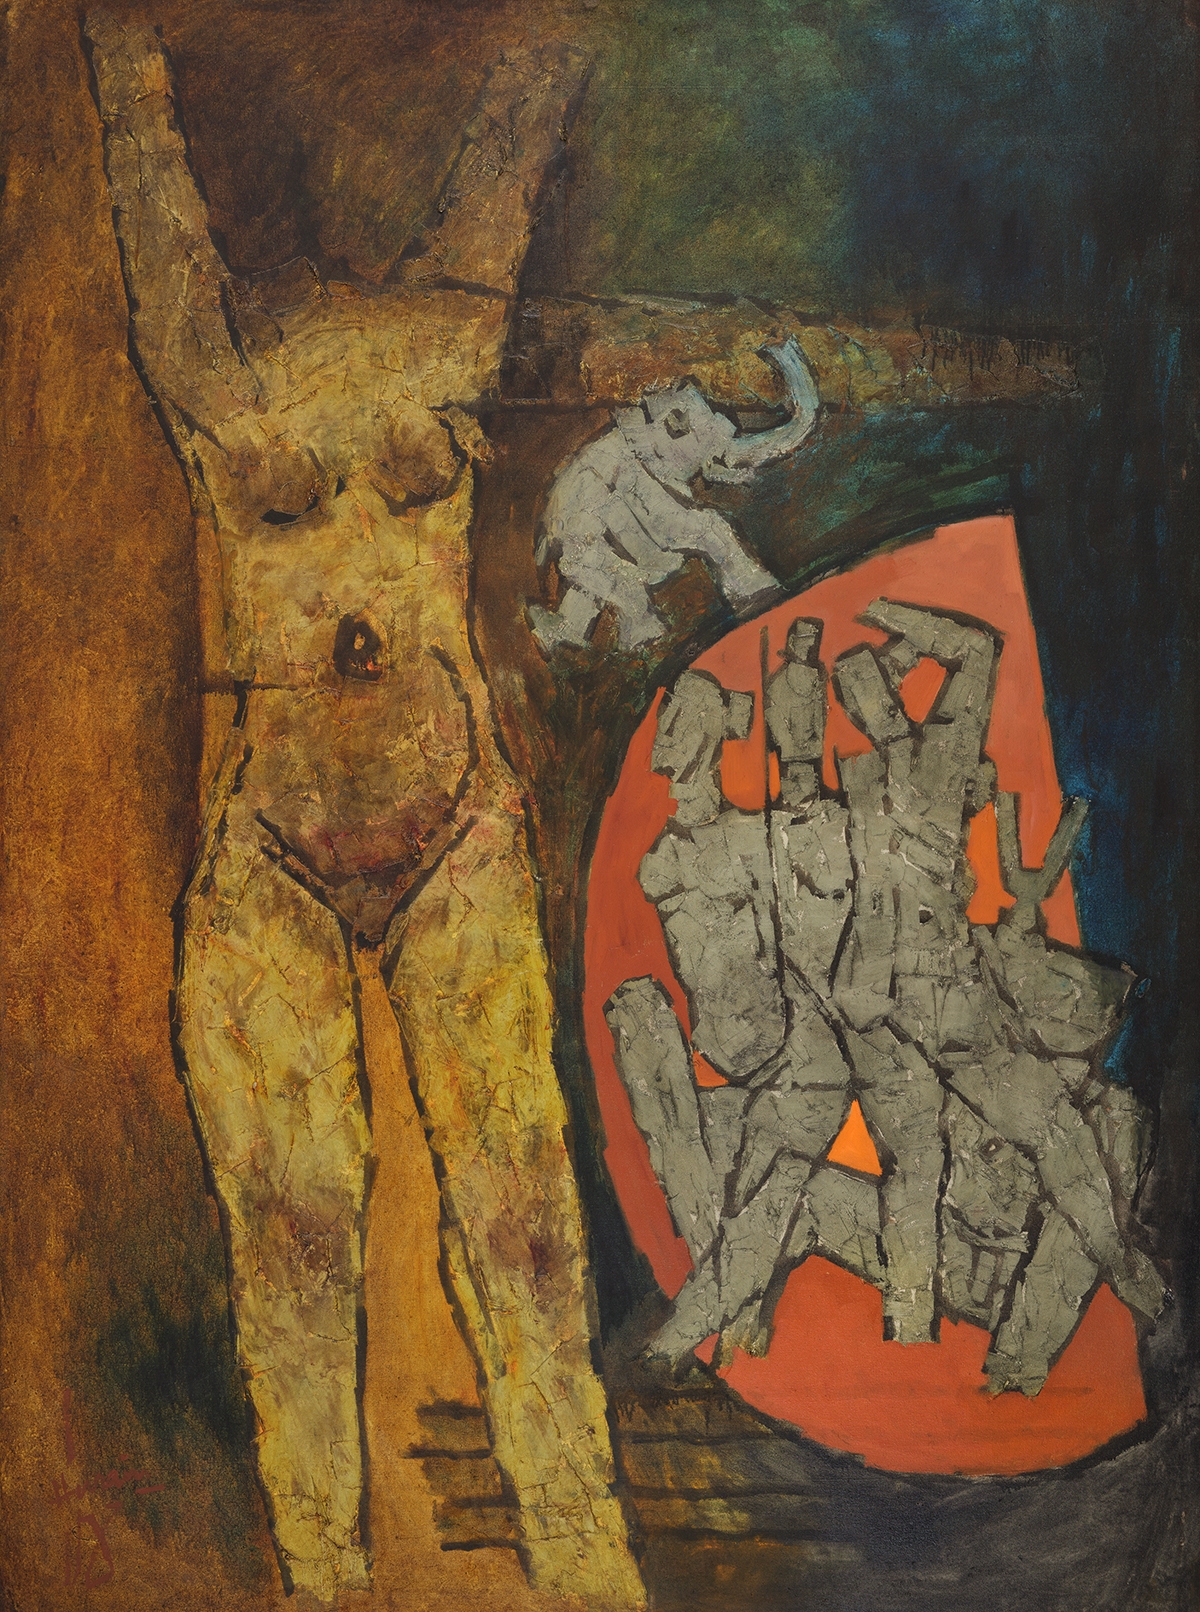 M. F. Husain 'Mahabali', 1972. Oil on canvas. H. 93 3/4 x W. 69 1/2 in. (238.1 x 176.5 cm). Peabody Essex Museum, Gift of the Chester and Davida Herwitz Collection, 2001 E301101. Courtesy of Peabody Essex Museum, Salem, MA. Photography by Walter Silver